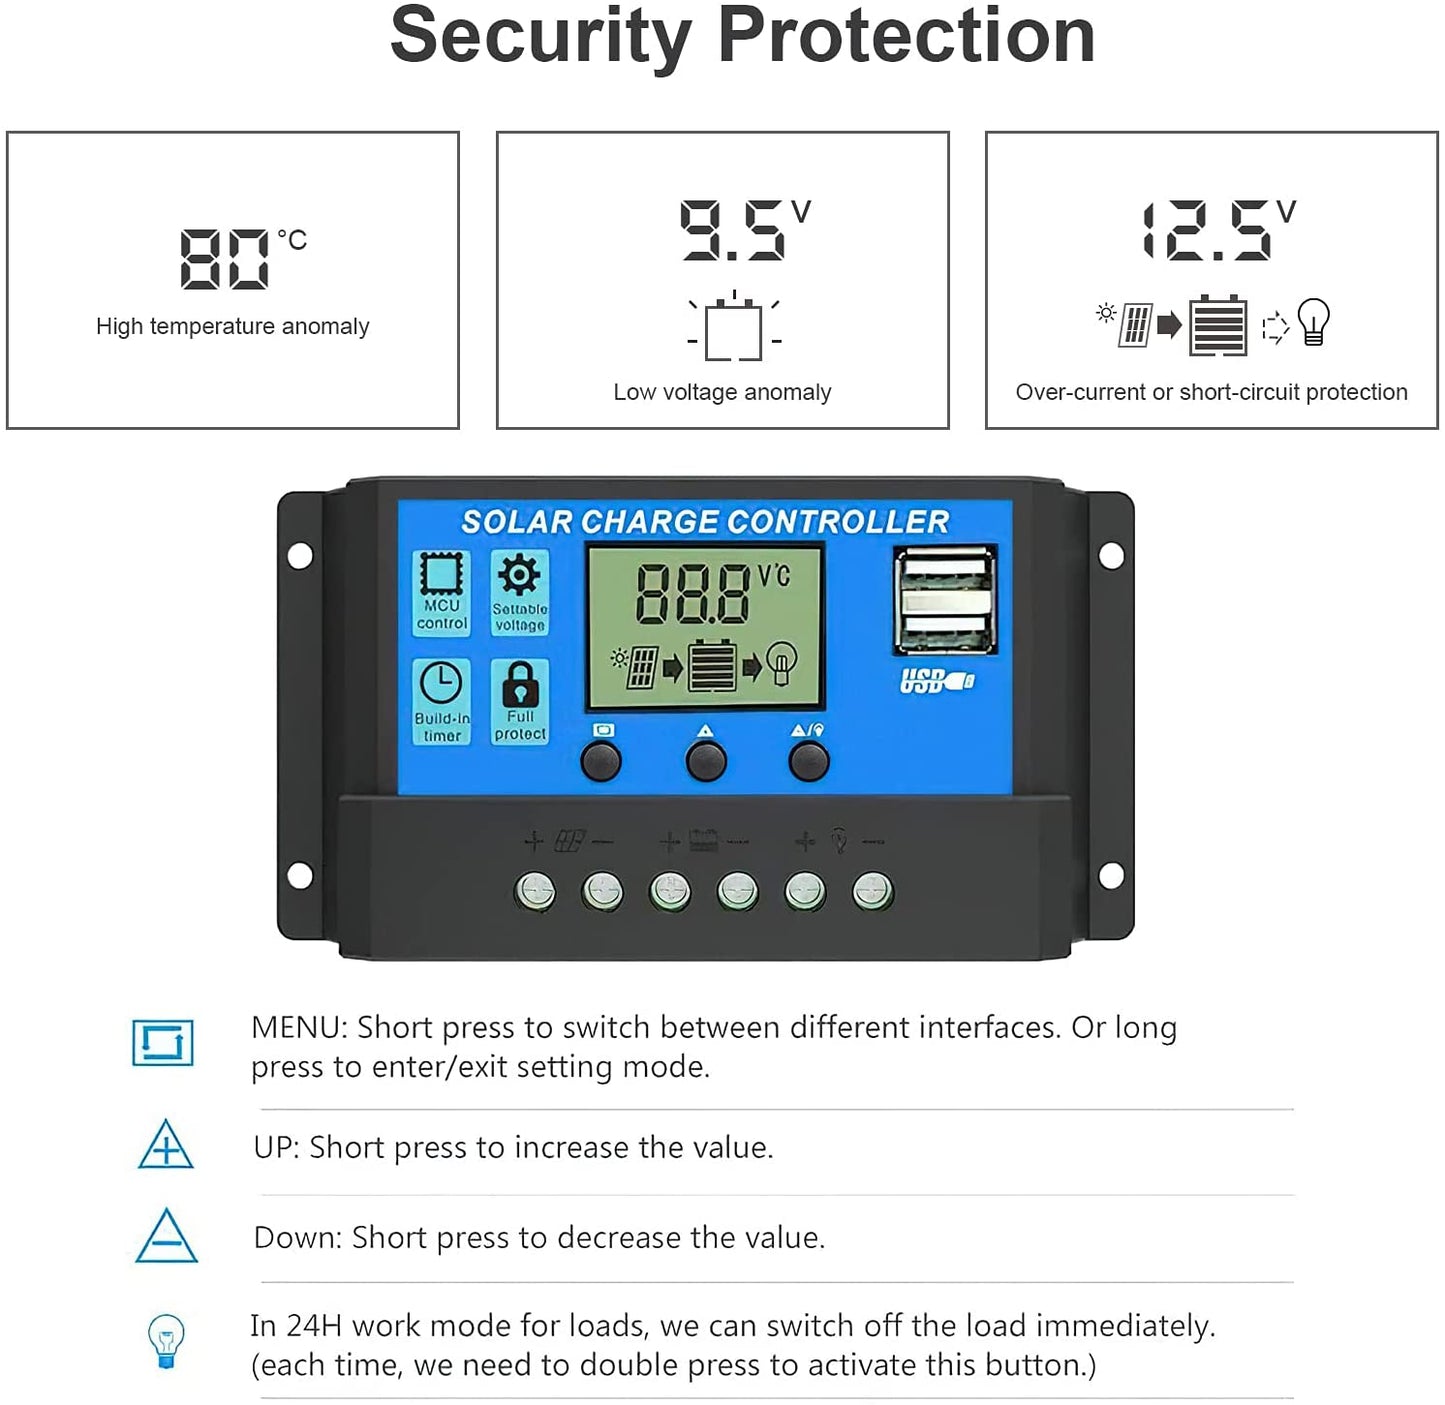 Security Protection 35v 25v High temperature anomaly D"